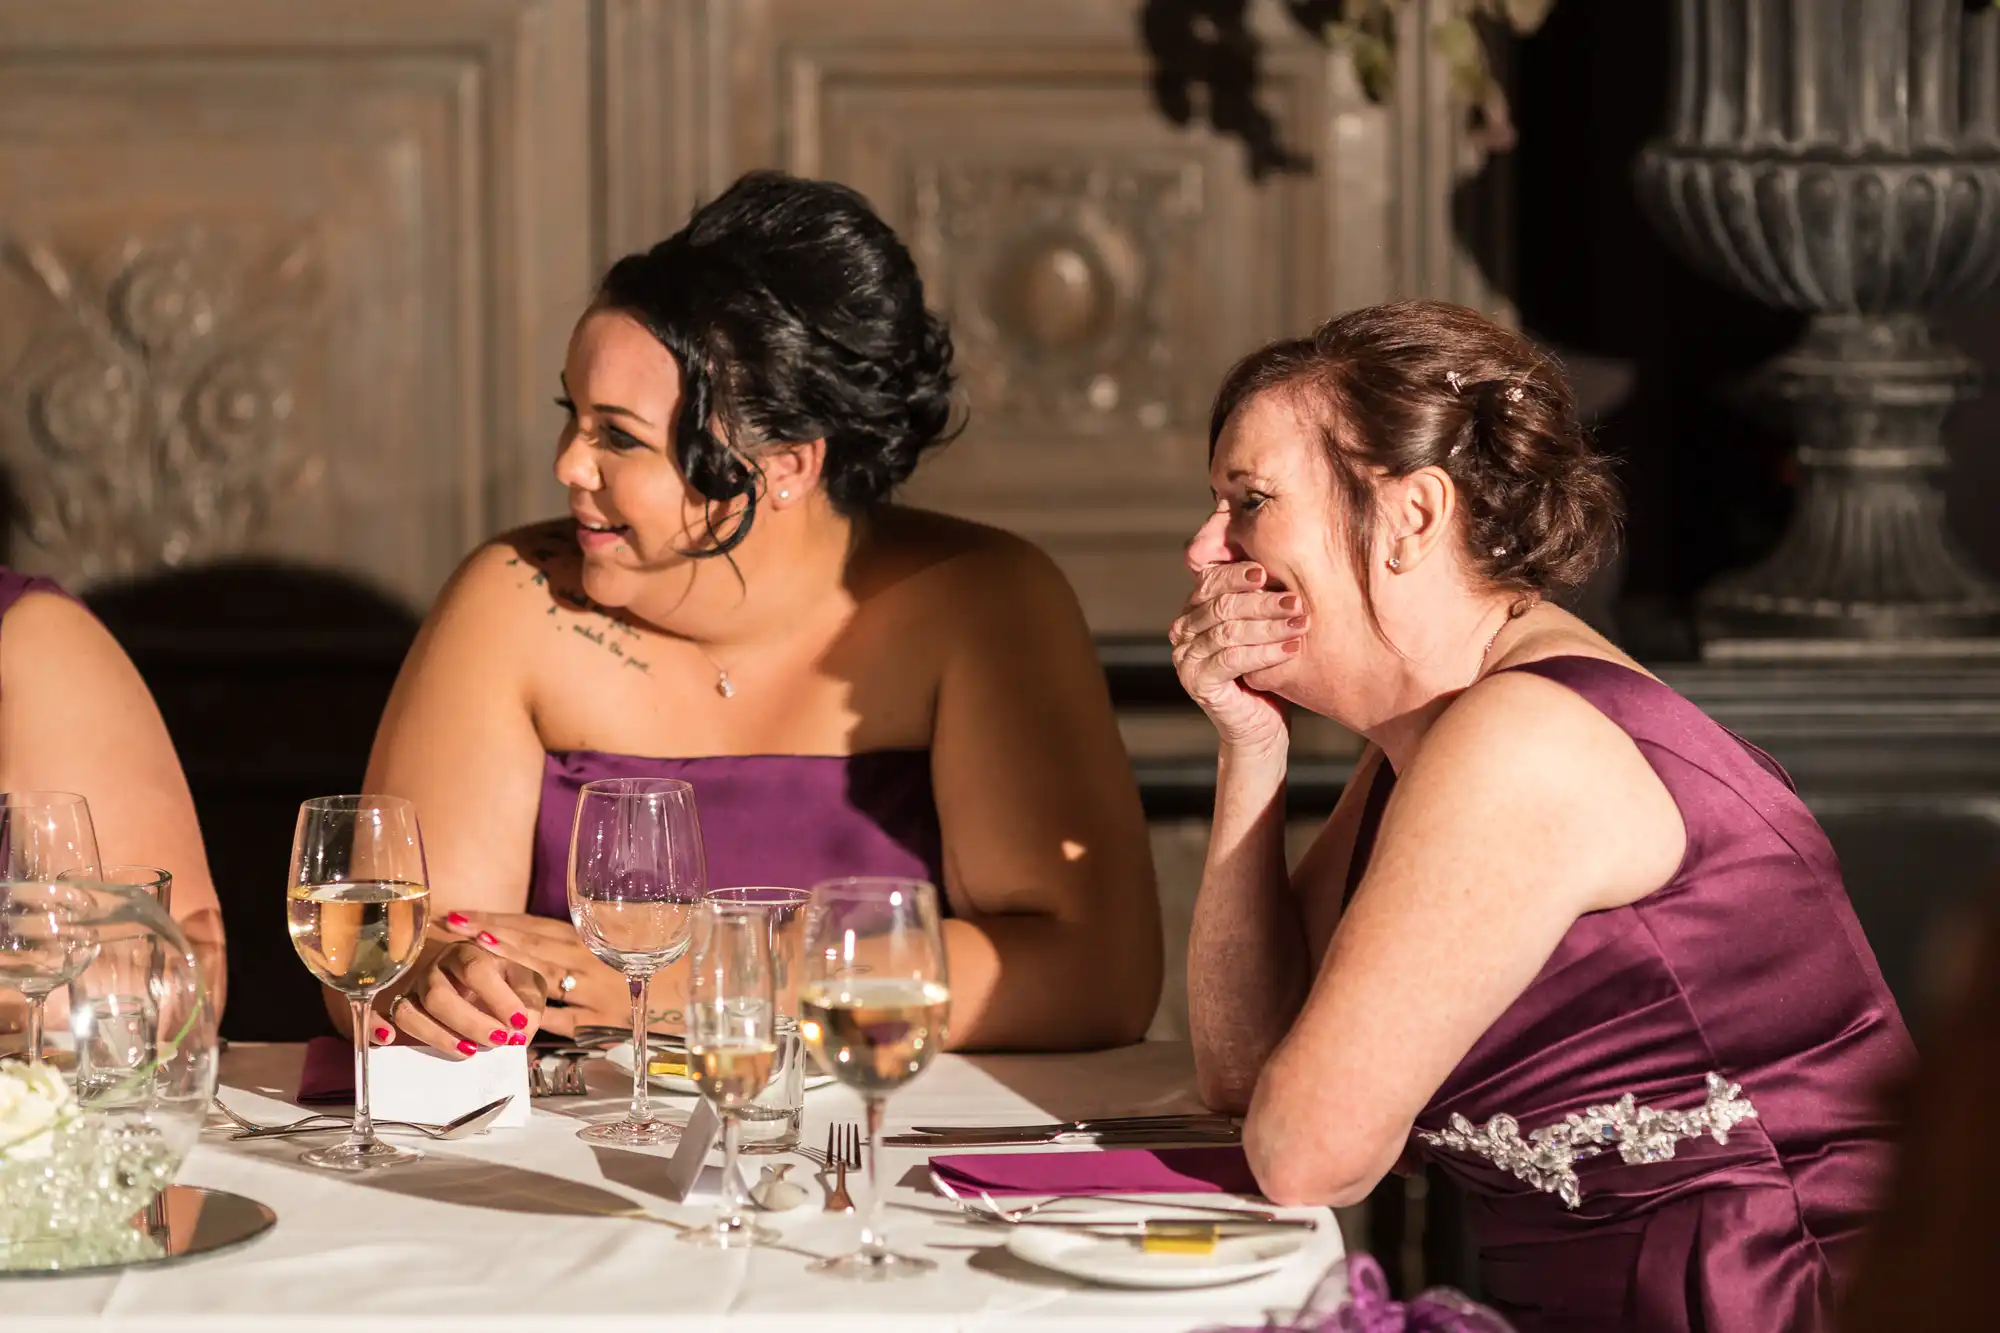 Two women in formal dresses, one in purple, laughing and conversing at a dining table set with wine glasses and white plates in a well-lit elegant room.